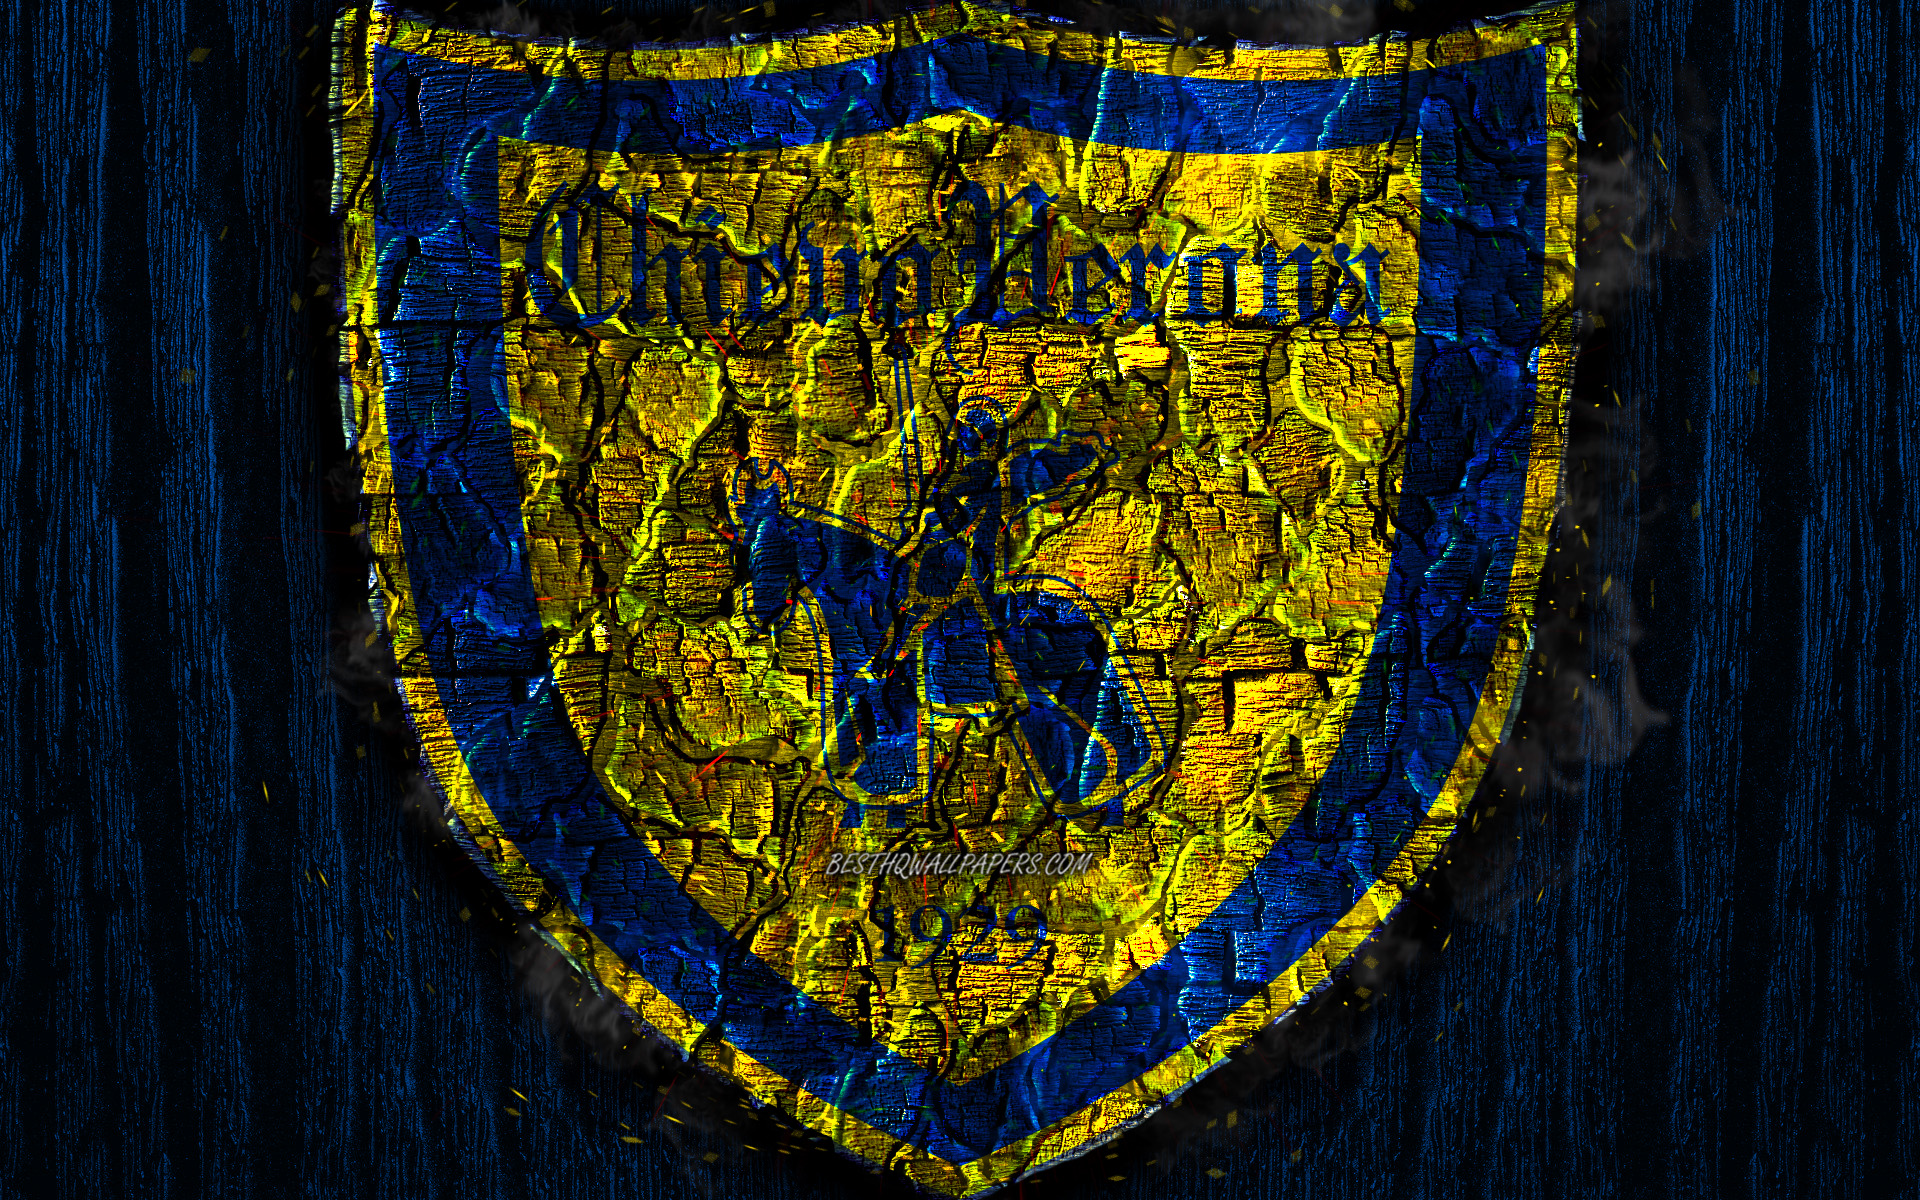 Download wallpaper Chievo FC, scorched logo, Serie A, blue wooden